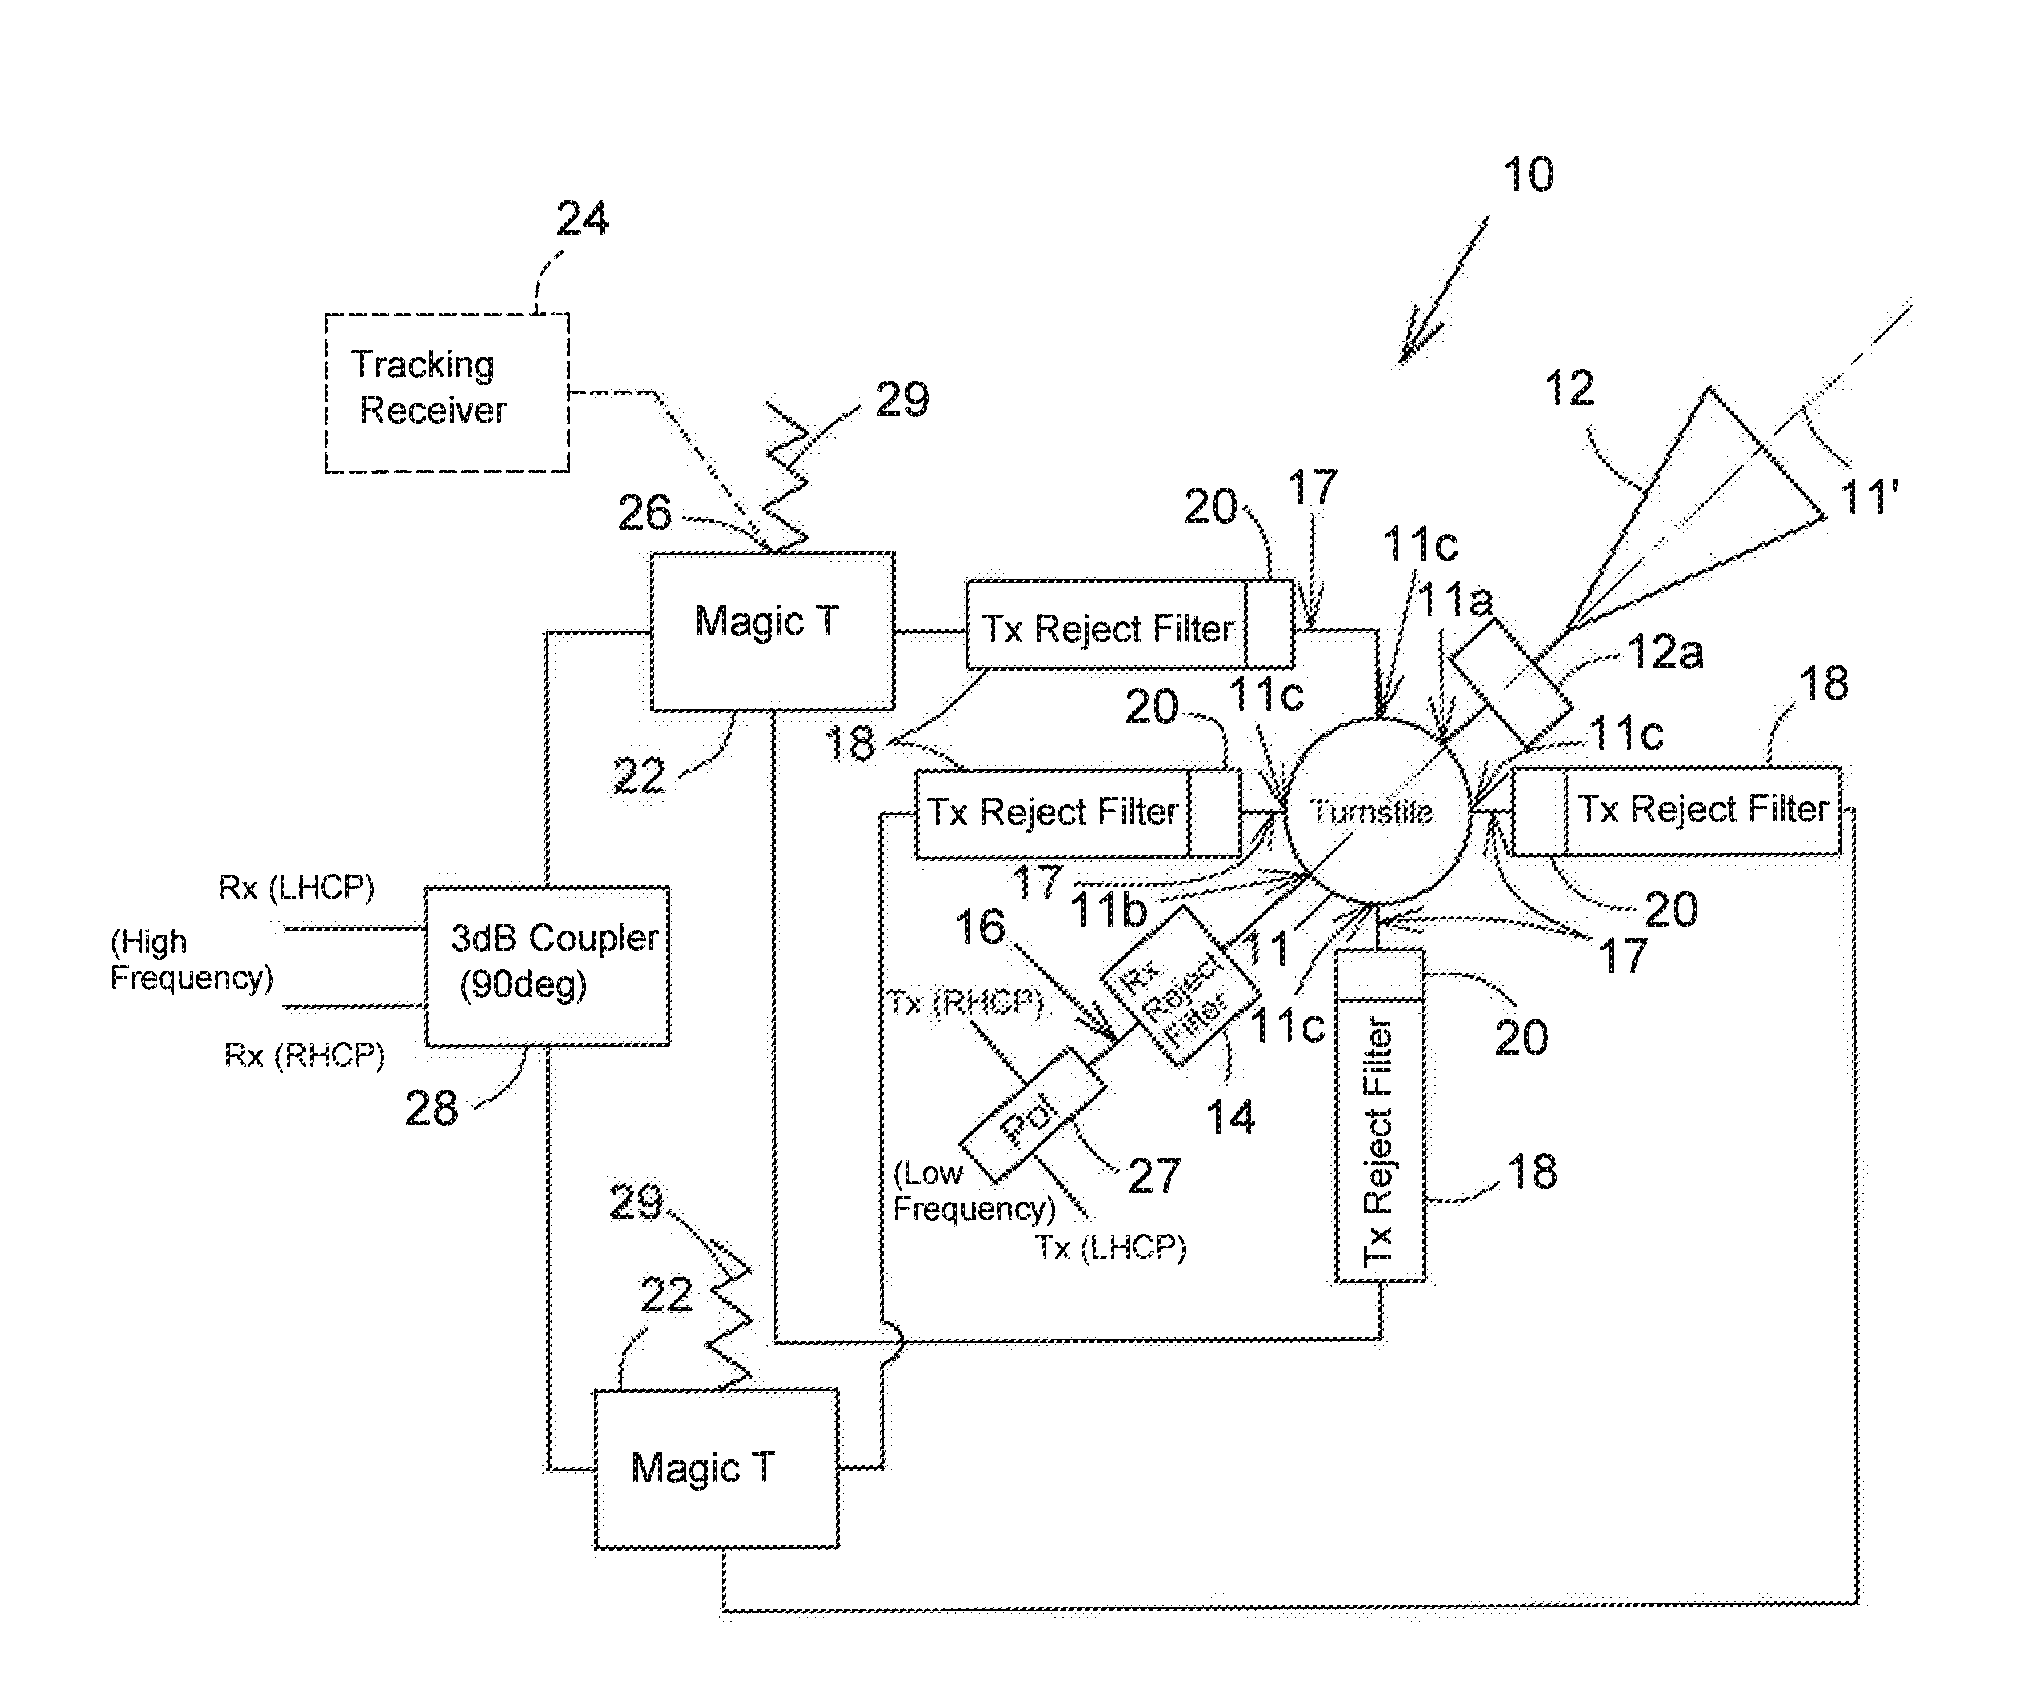 Orthomode junction assembly with associated filters for use in an antenna feed system